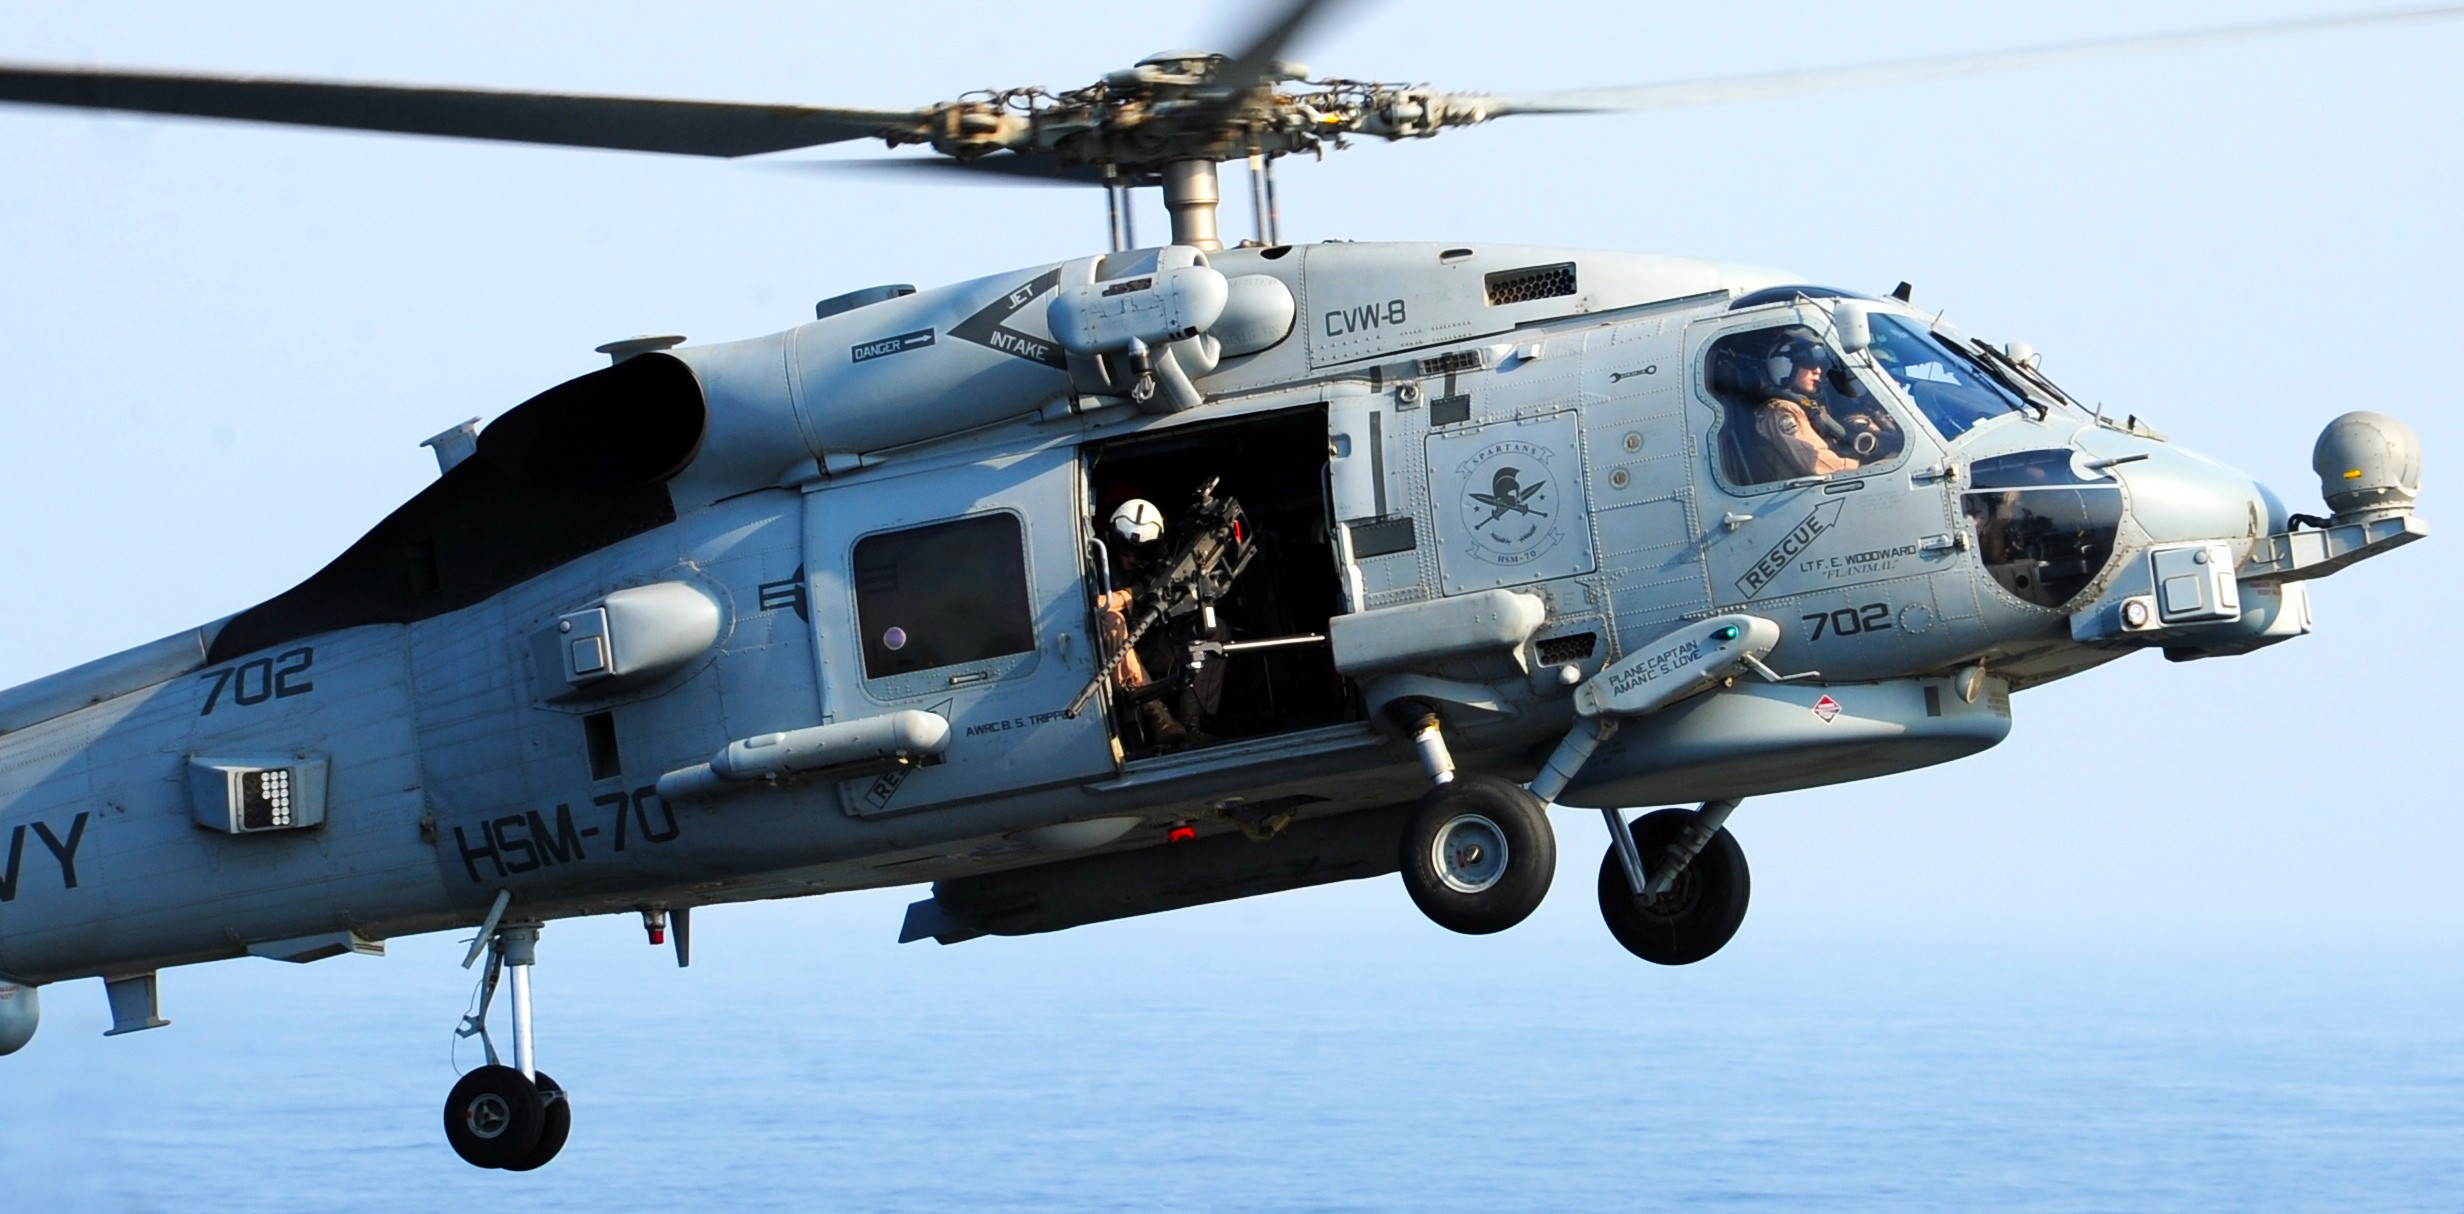 hsm-70 spartans helicopter maritime strike squadron mh-60r seahawk 2014 92